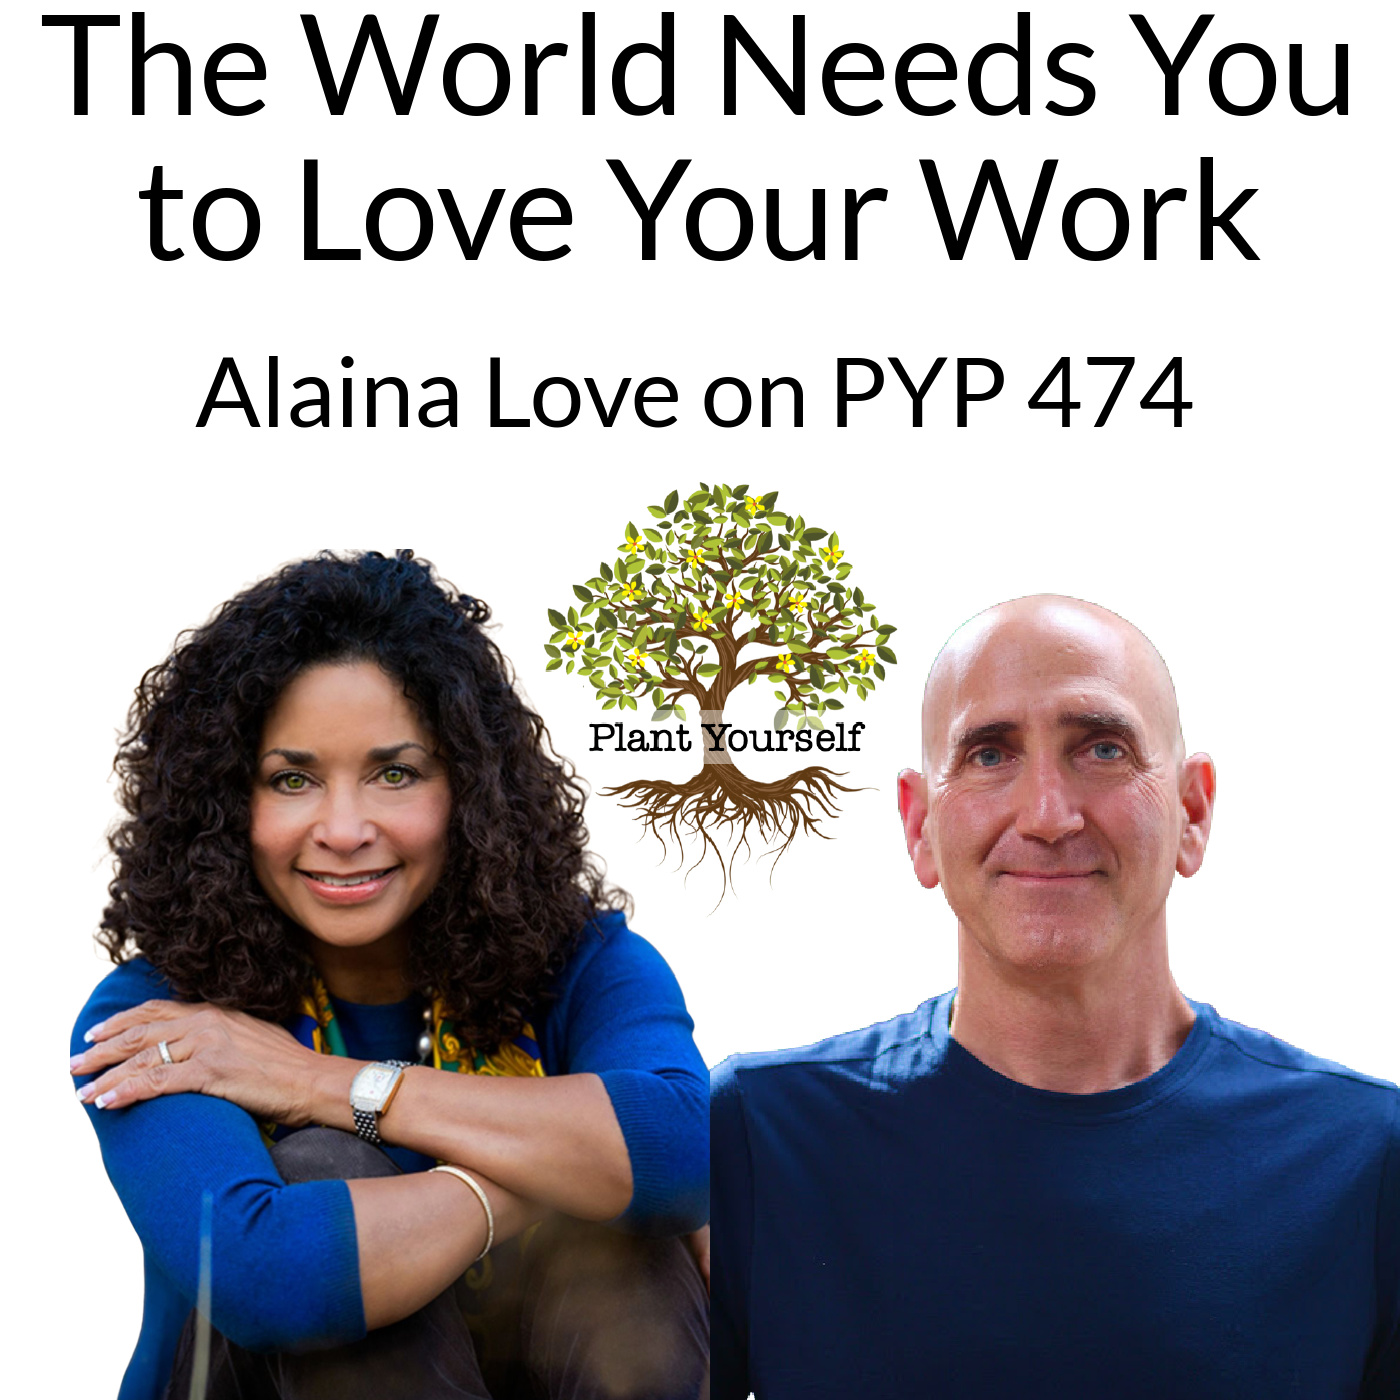 The World Needs You to Love Your Work: Alaina Love on PYP 474